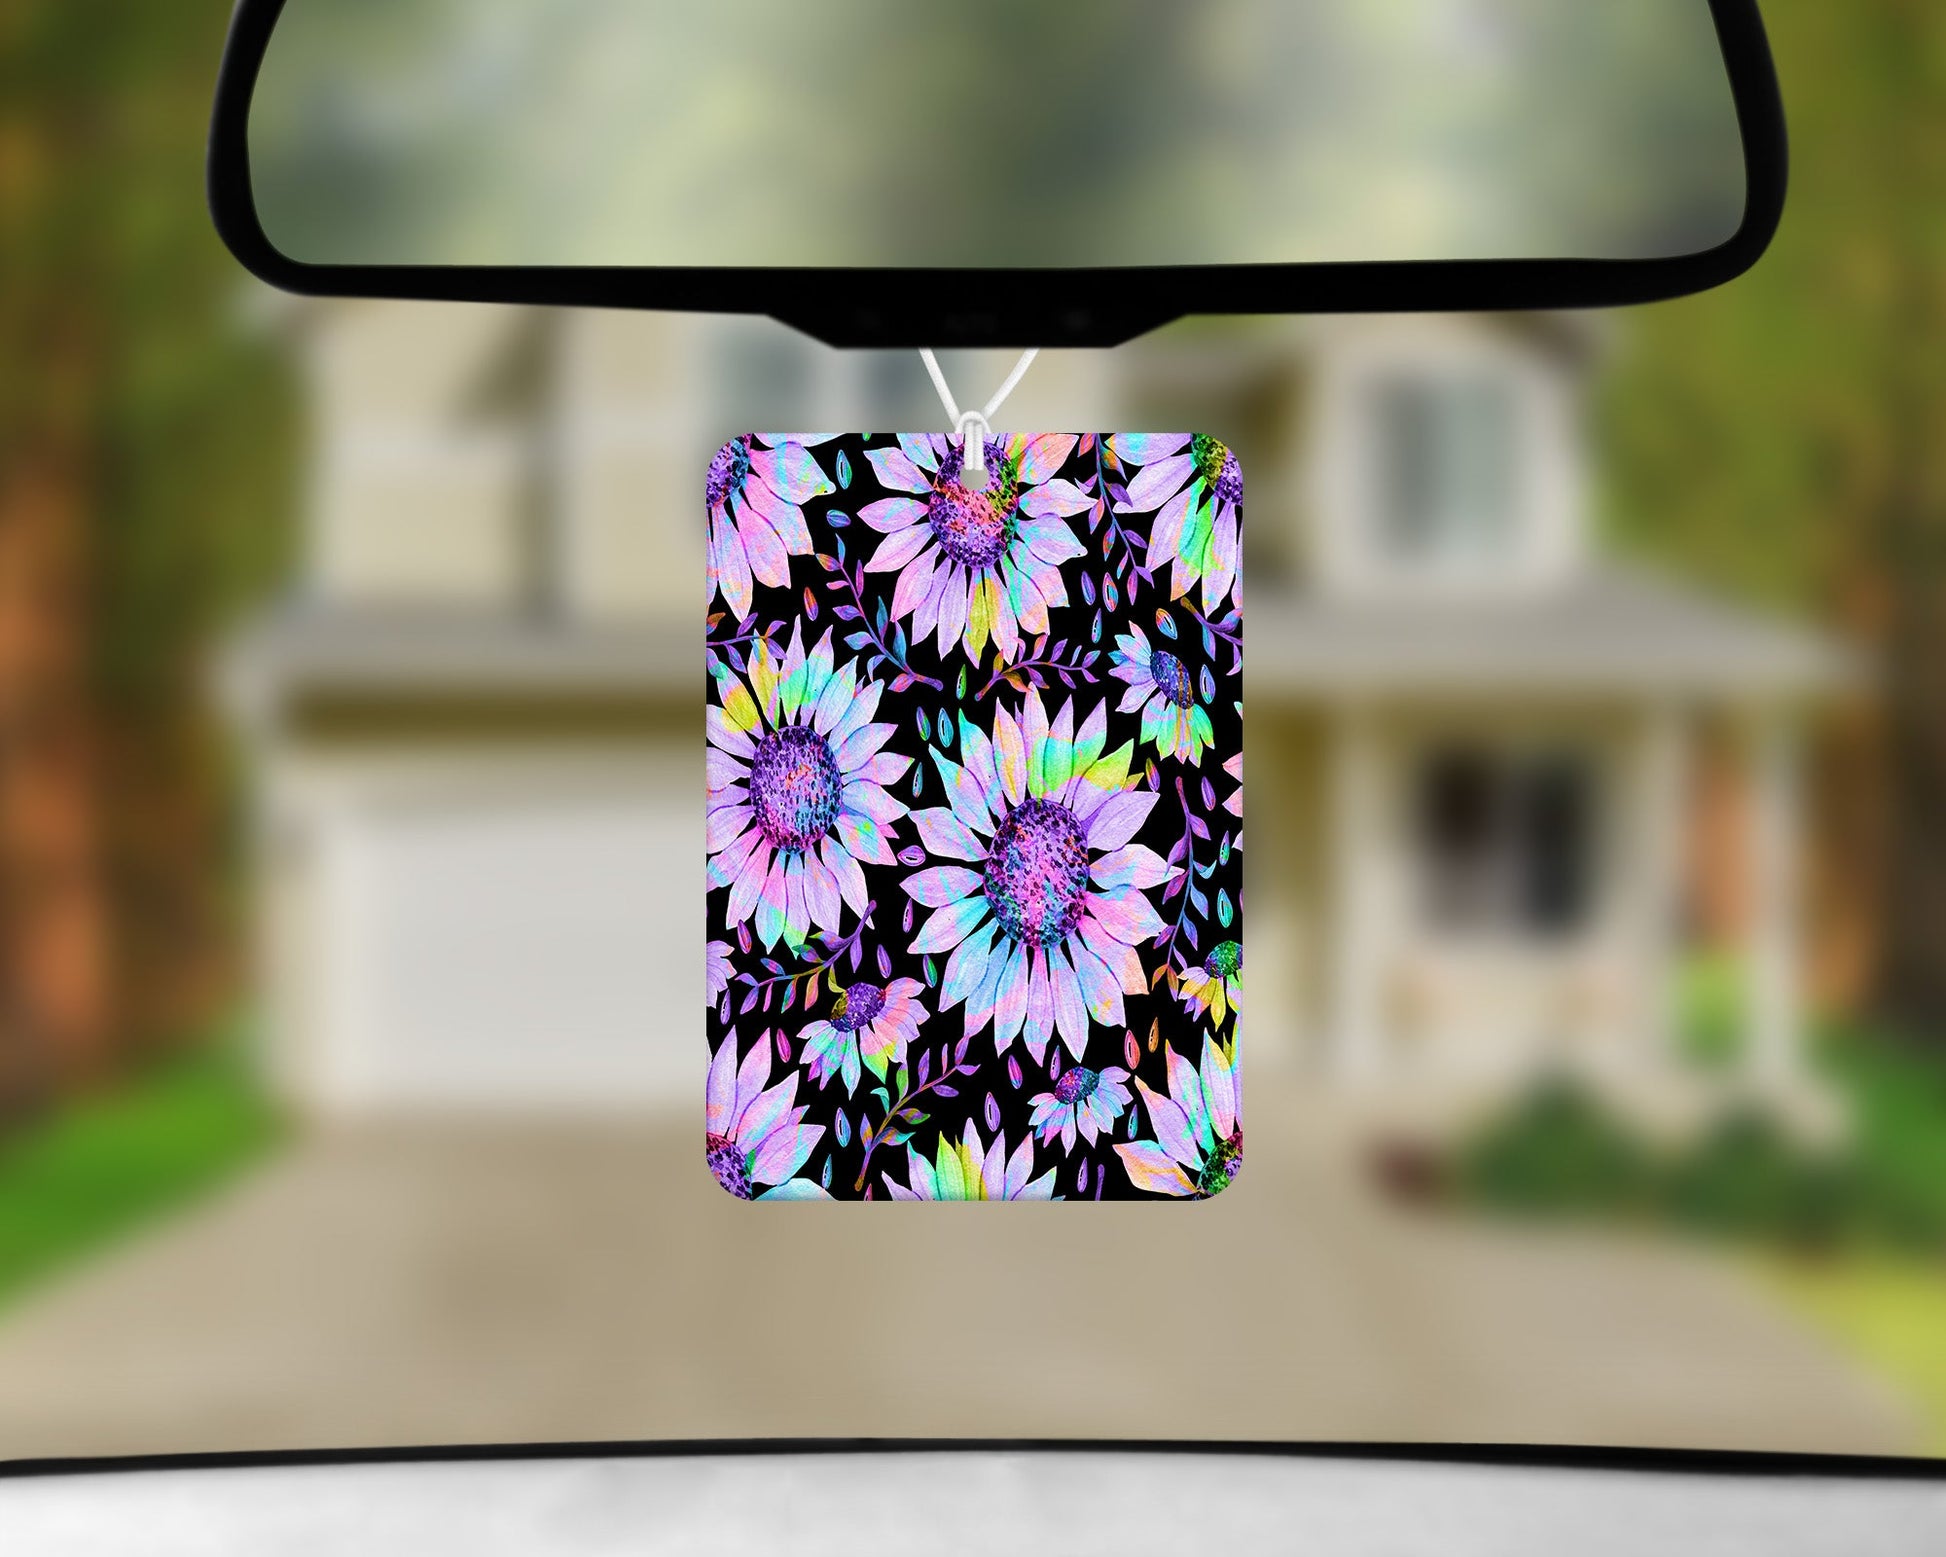 Neon Sunflowers|Freshie|Includes Scent Bottle - Vehicle Air Freshener